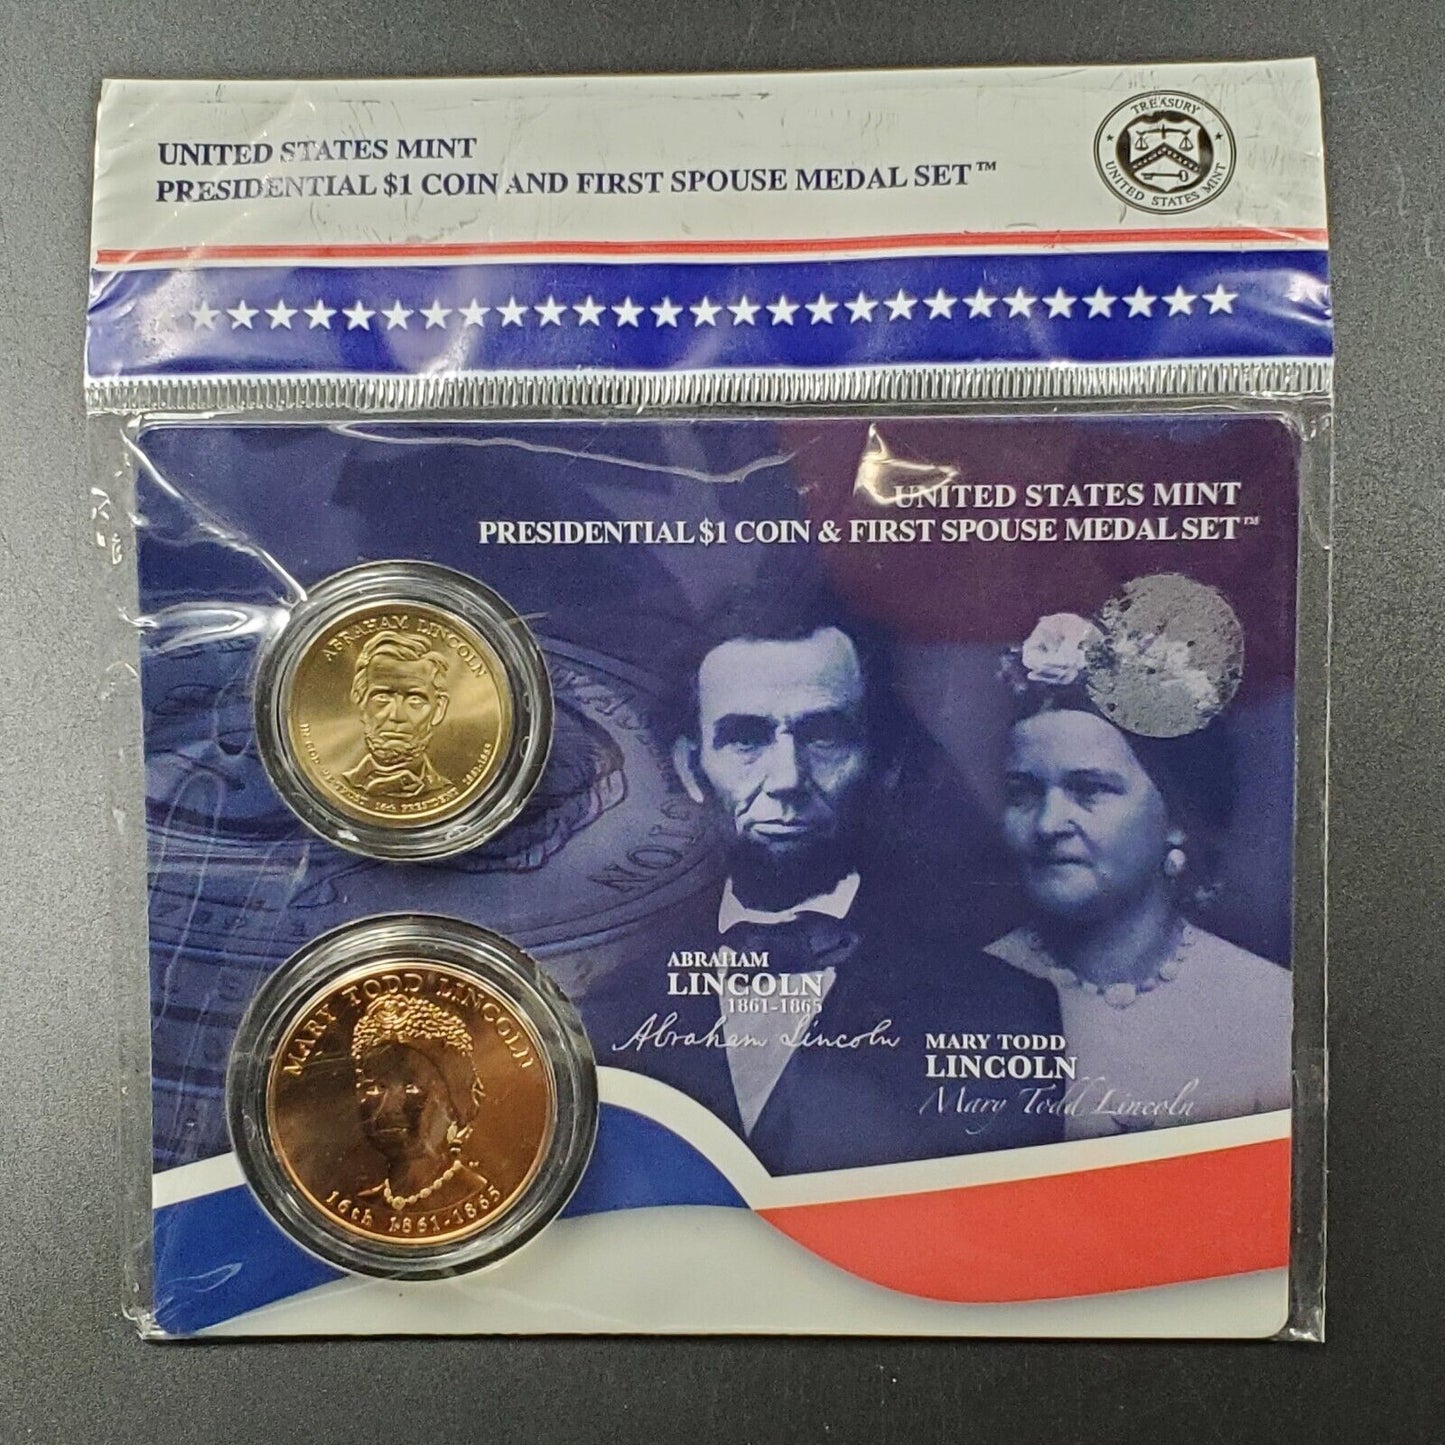 2010 Abraham Lincoln $1 Presidential Coin First Spouse Medal Sealed OGP